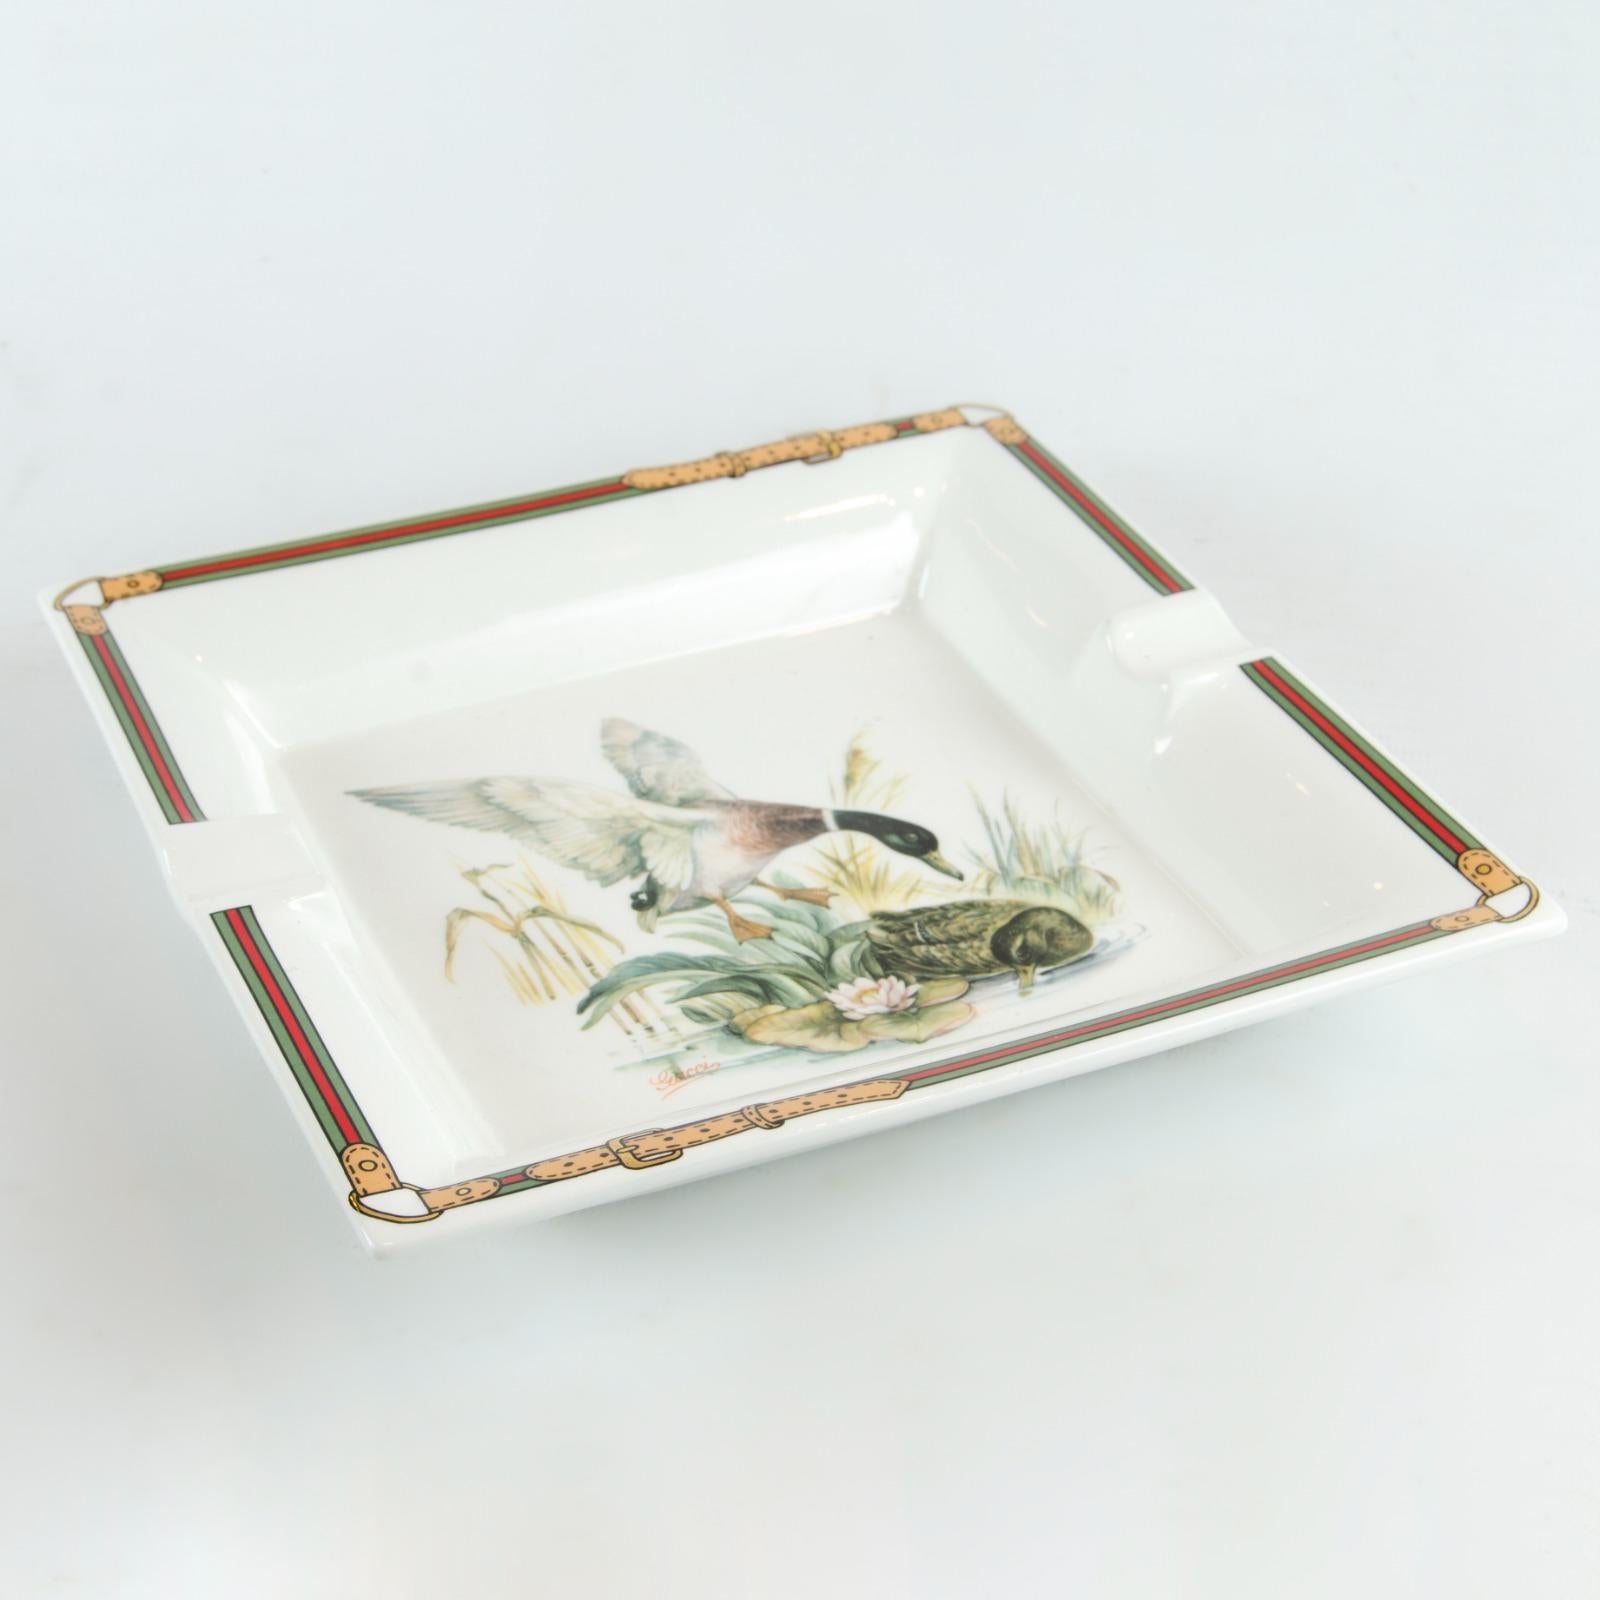 - White Porcelain
- Green/red/green belts detailing along the borders
- Ducks theme design in the center
- 'GUCCI - Made in Italy' embossed on the base of the ashtray
- Square-Shaped
- MEASUREMENTS (inches/cms): 7 1/2 x 7 1/2 inches - 19 x 19